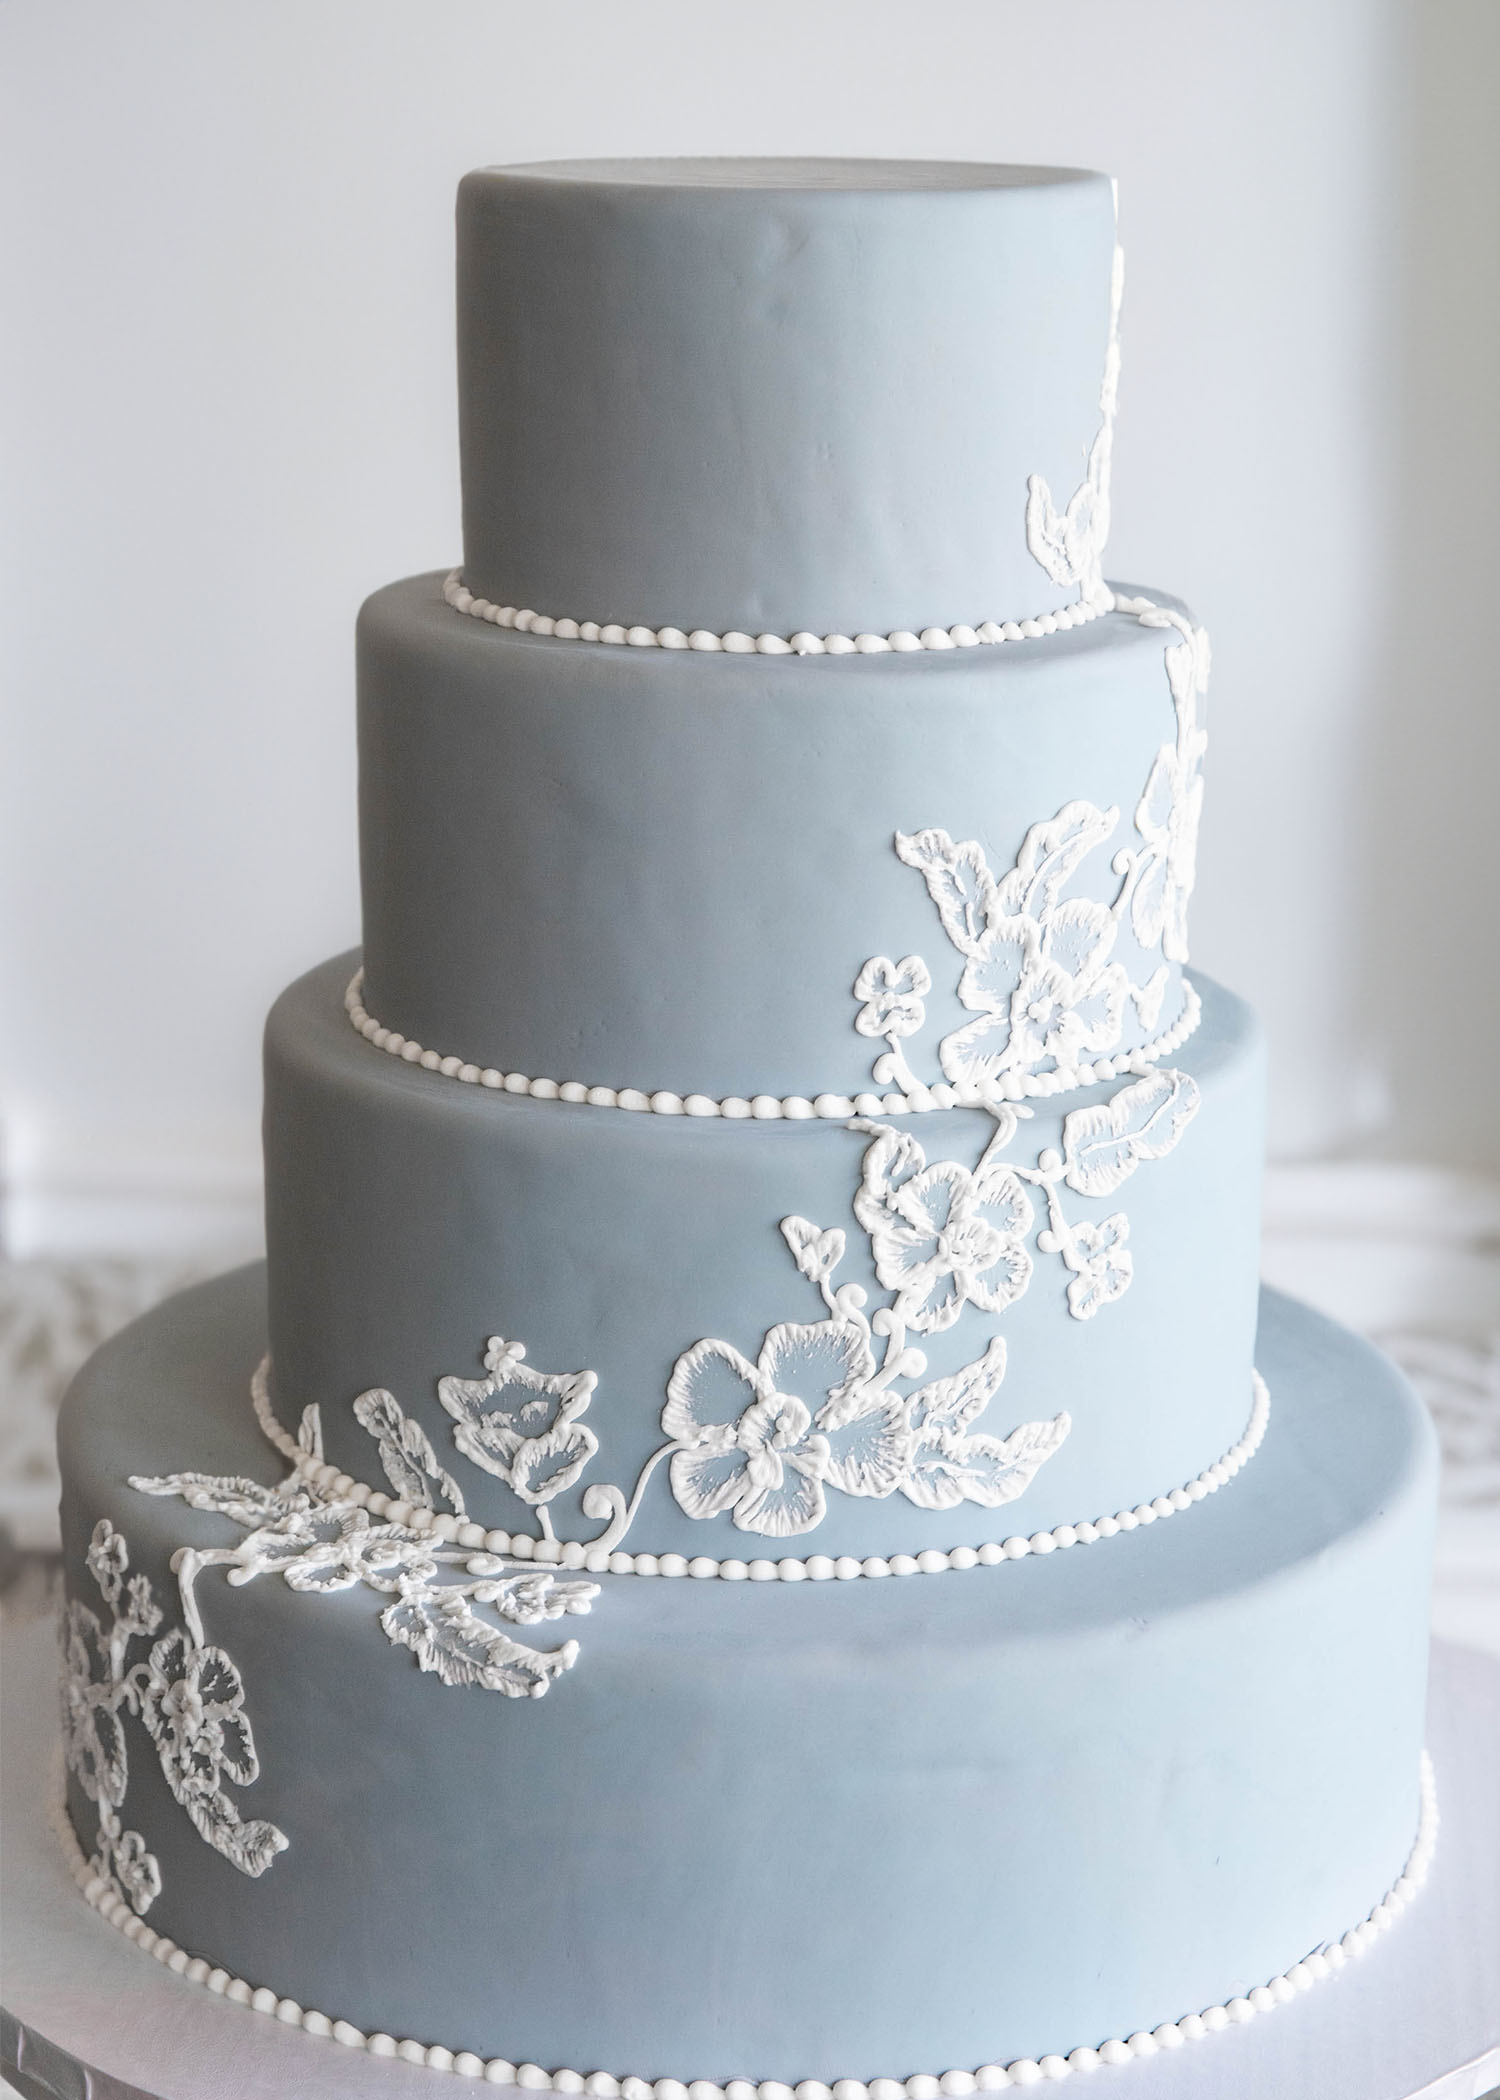 Painted floral design cascading down the cake. Small beaded border on all four tiers. Minimal, elegant, and modern wedding cake design by Bethel Bakery Pittsburgh PA.